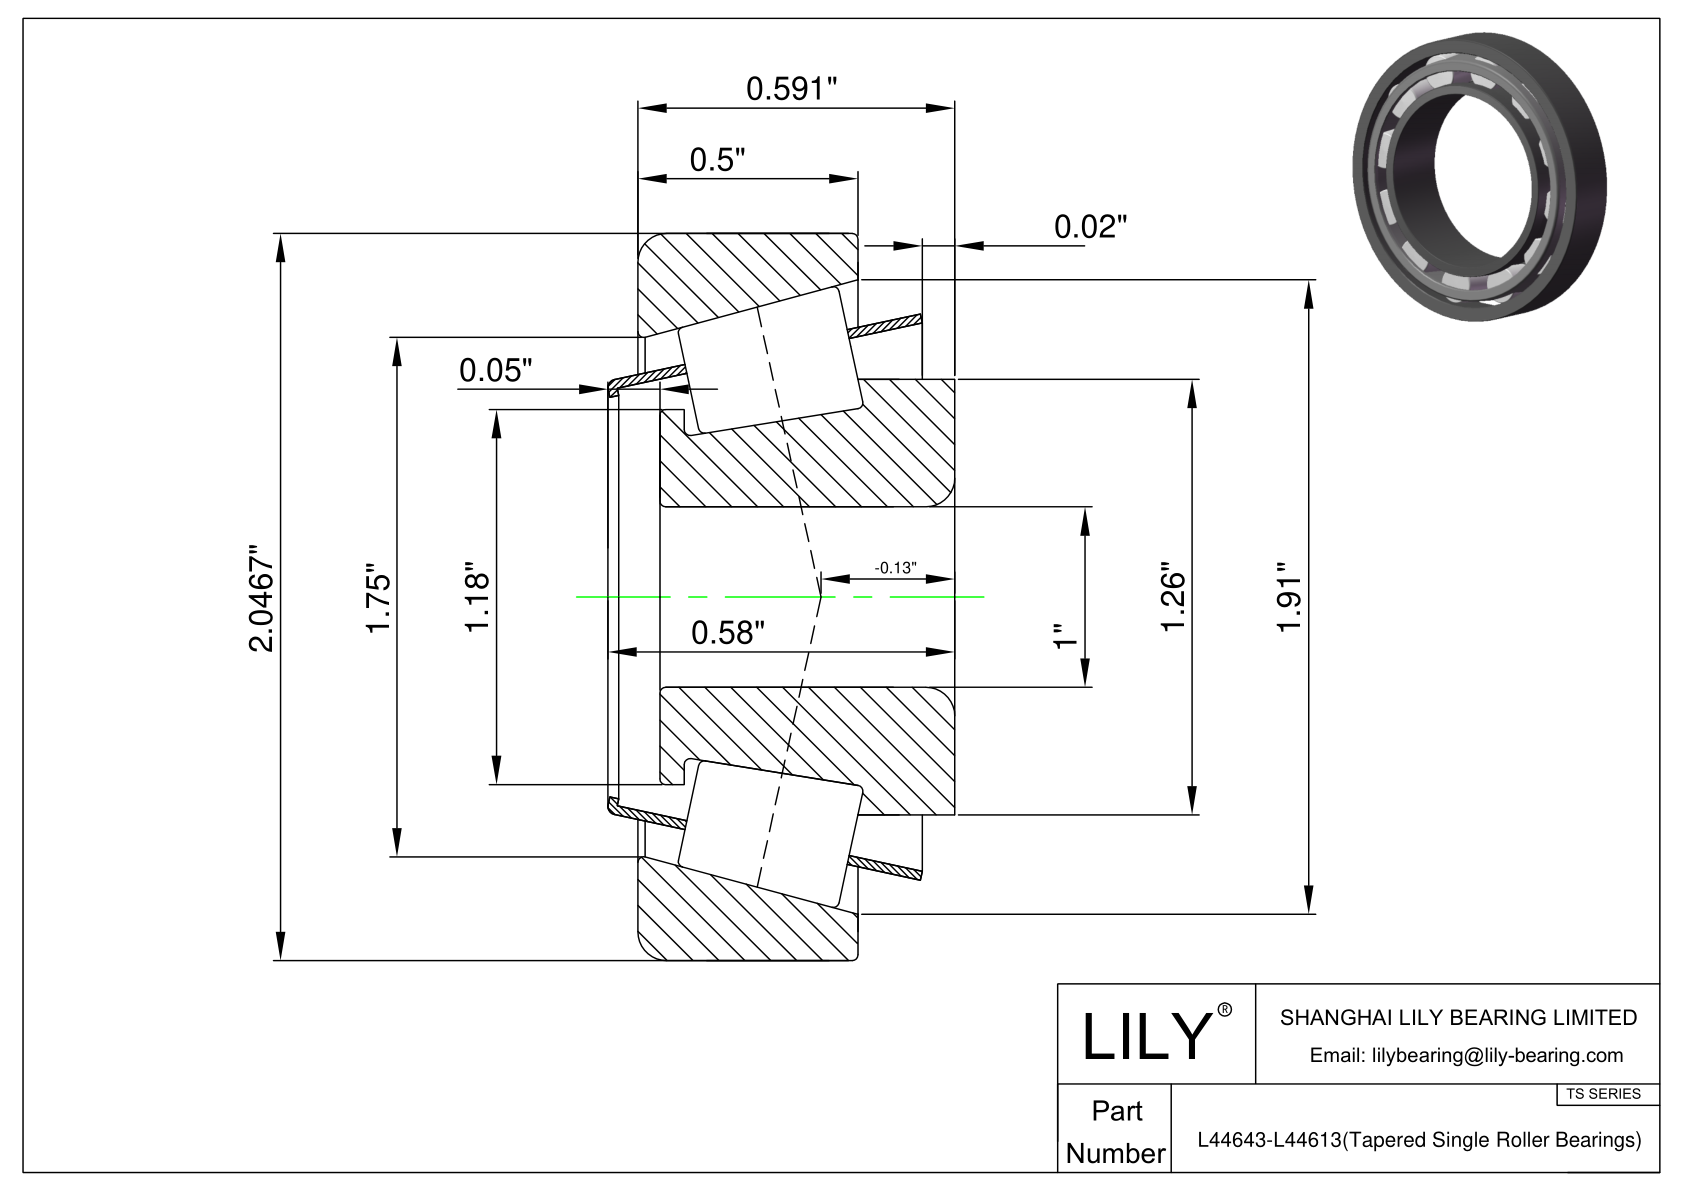 L44643-L44613 TS (Tapered Single Roller Bearings) (Imperial) cad drawing